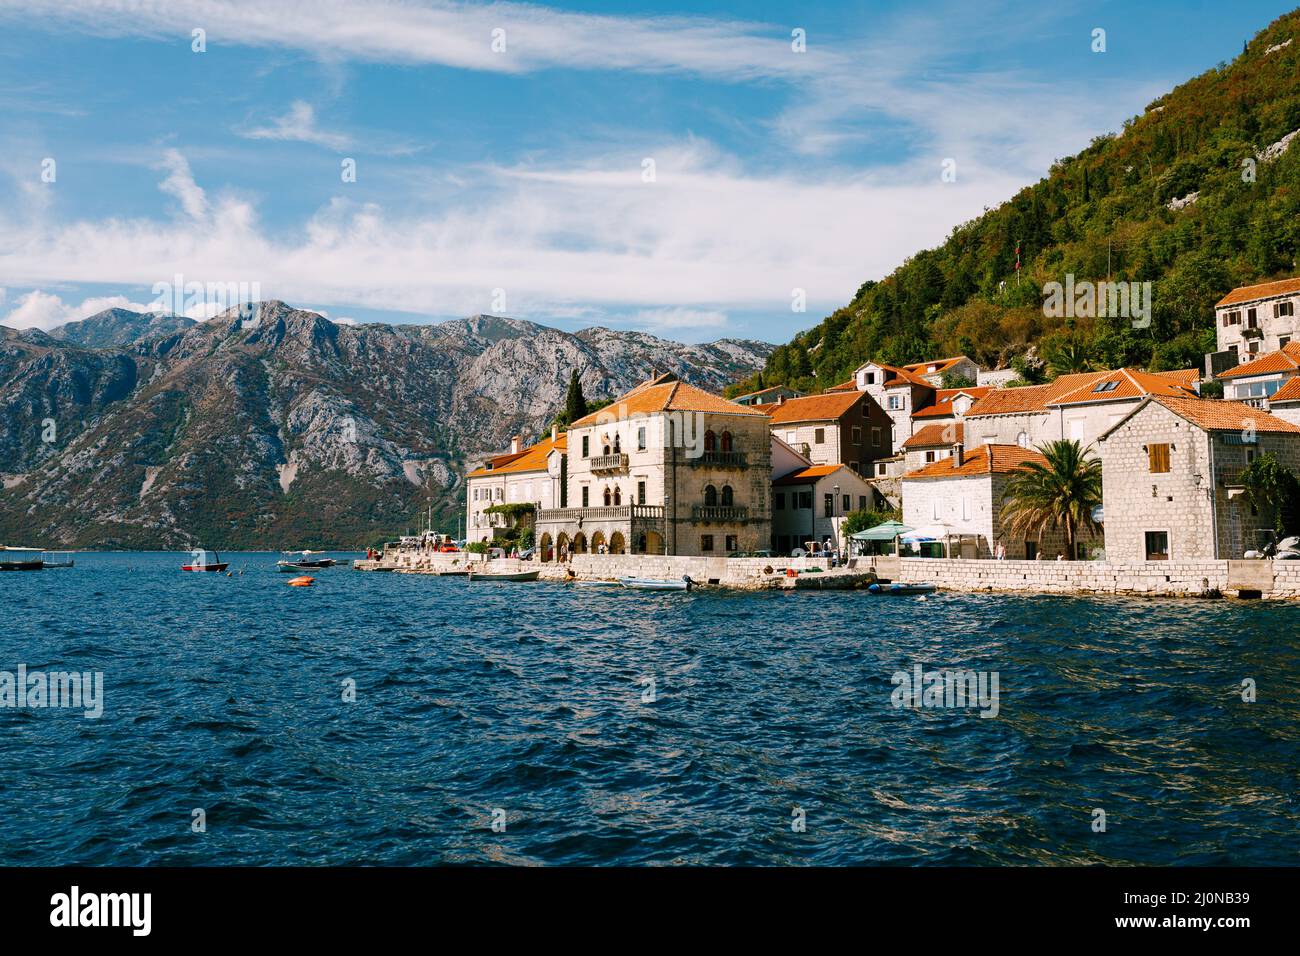 Houses with red tiled roofs on the banks of Perast. Montenegro Stock Photo